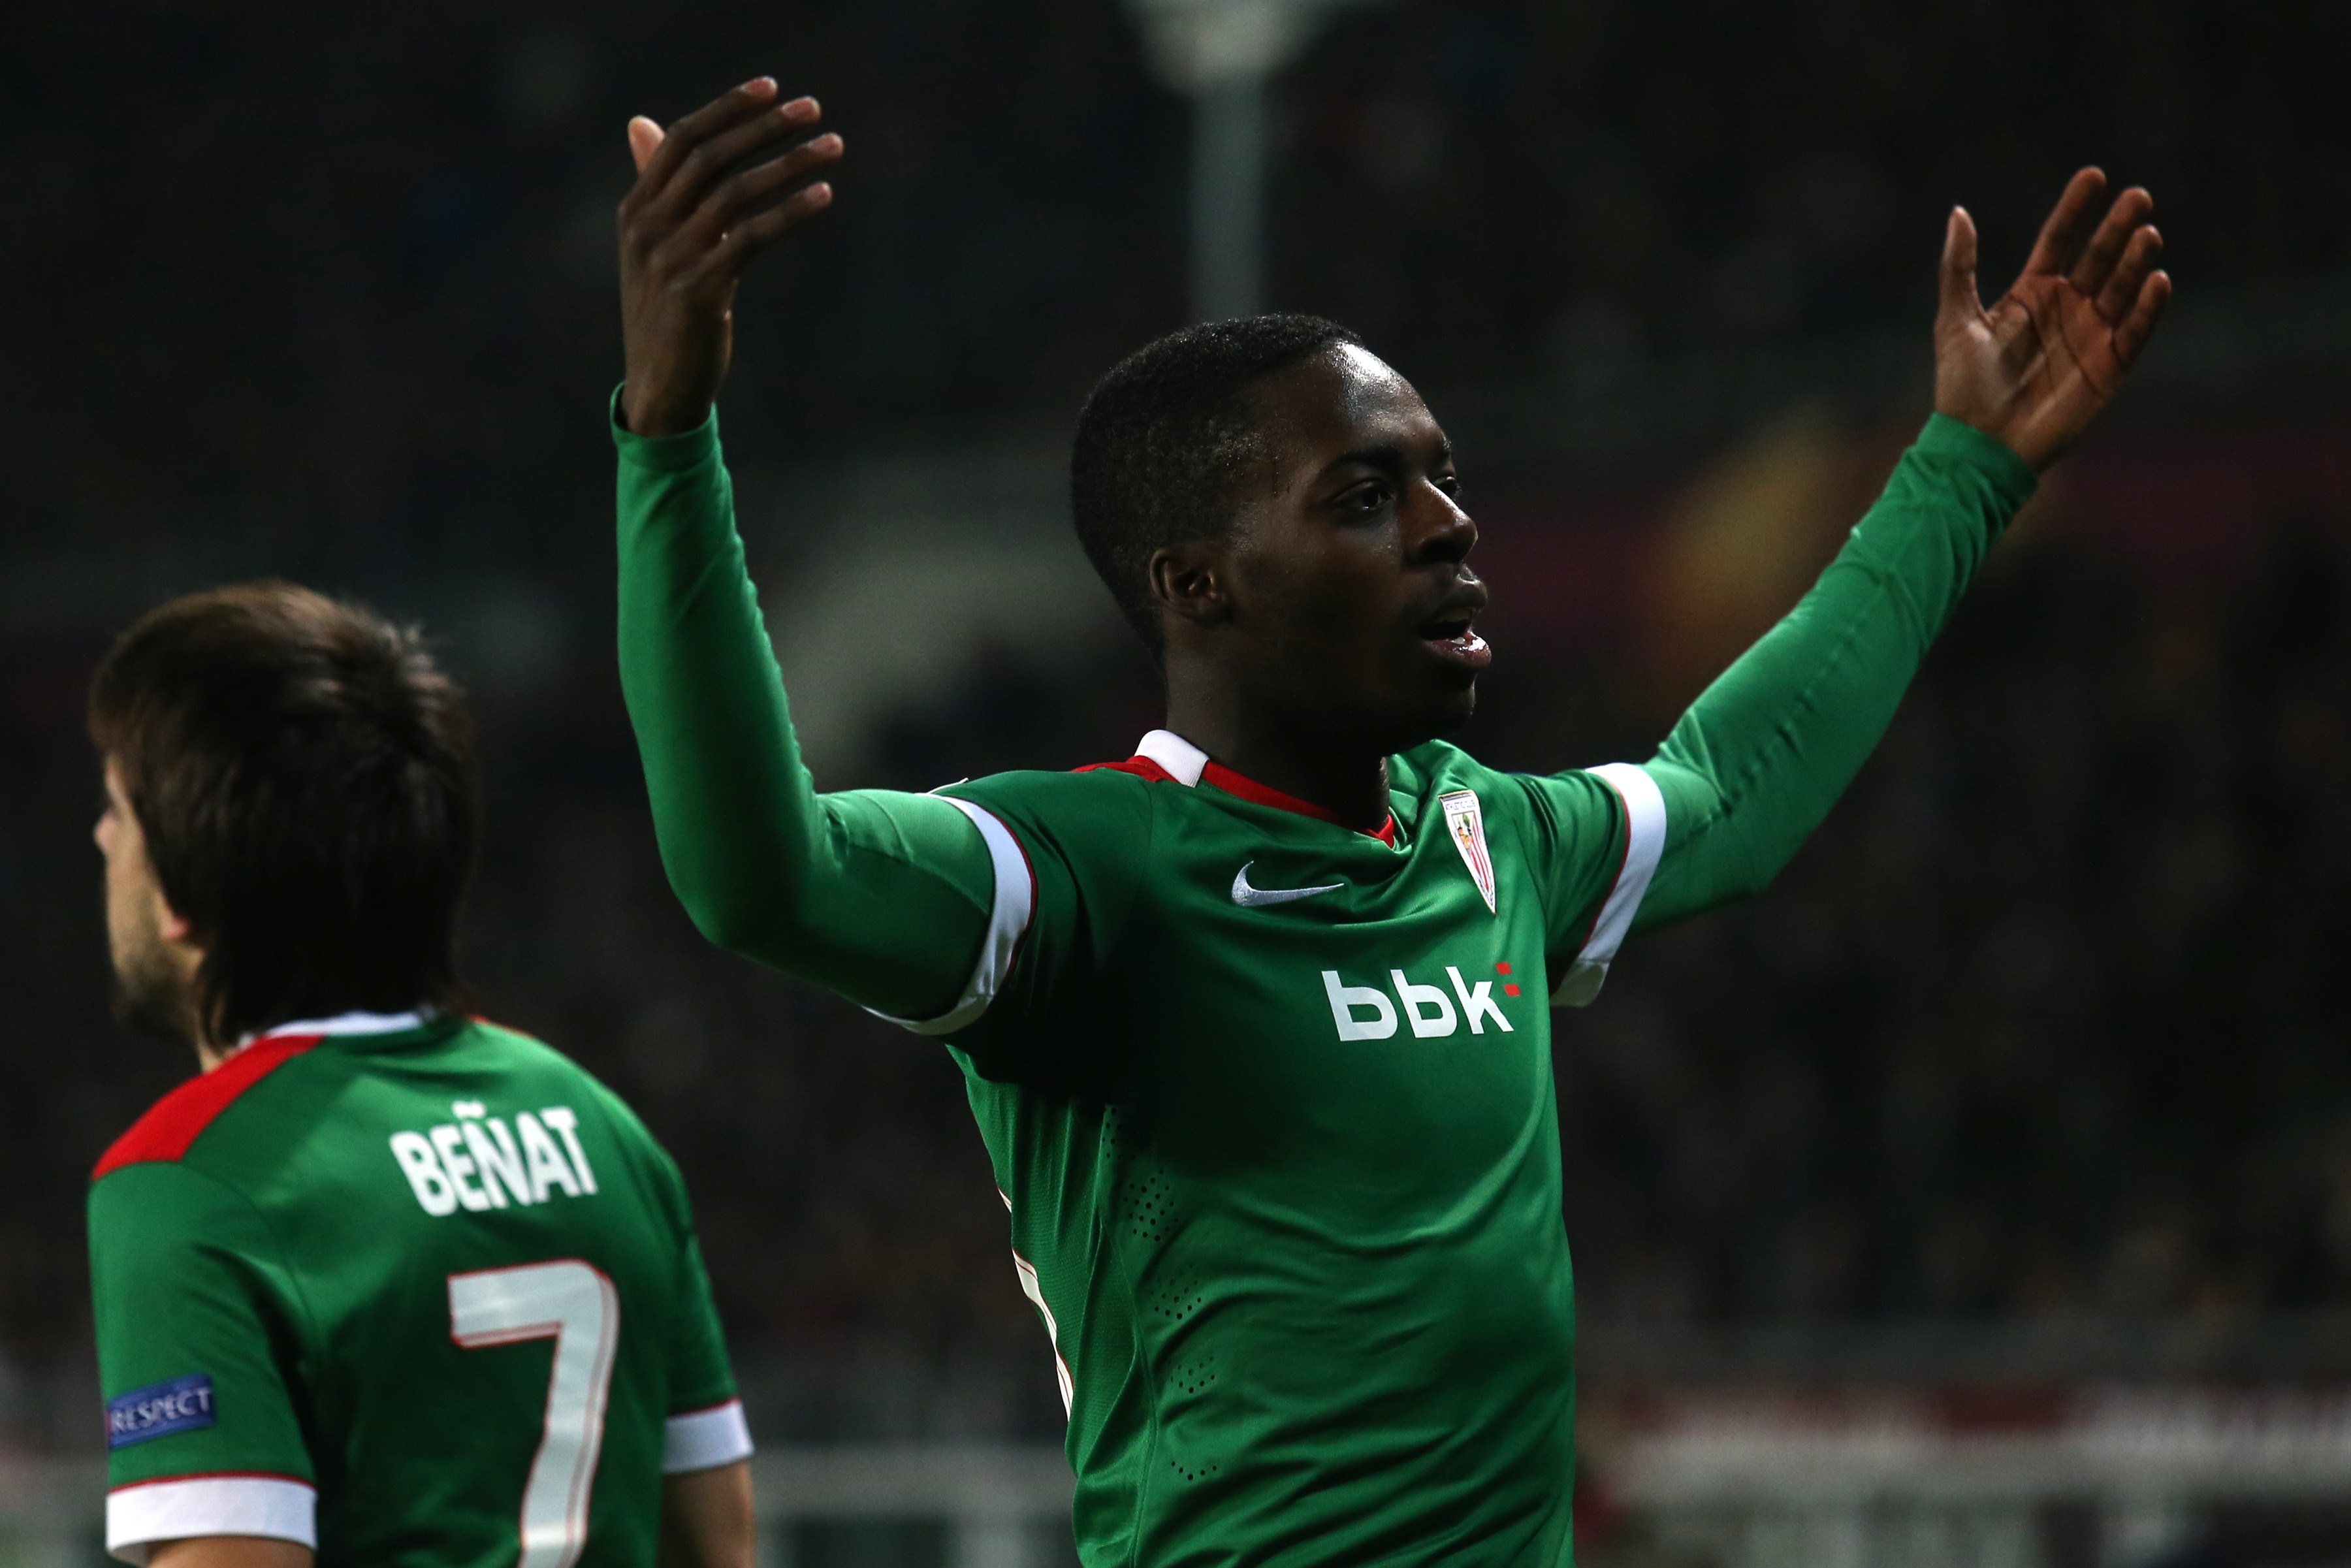 Athletic Bilbao's Spanish forward Inaki Williams celebrates after scoring during the UEFA Europe League round of 32 football match Torino Vs Athletic Bilbao on February 19, 2015 at the "Olympic Stadium" in Turin.  AFP PHOTO / MARCO BERTORELLO        (Photo credit should read MARCO BERTORELLO/AFP/Getty Images)